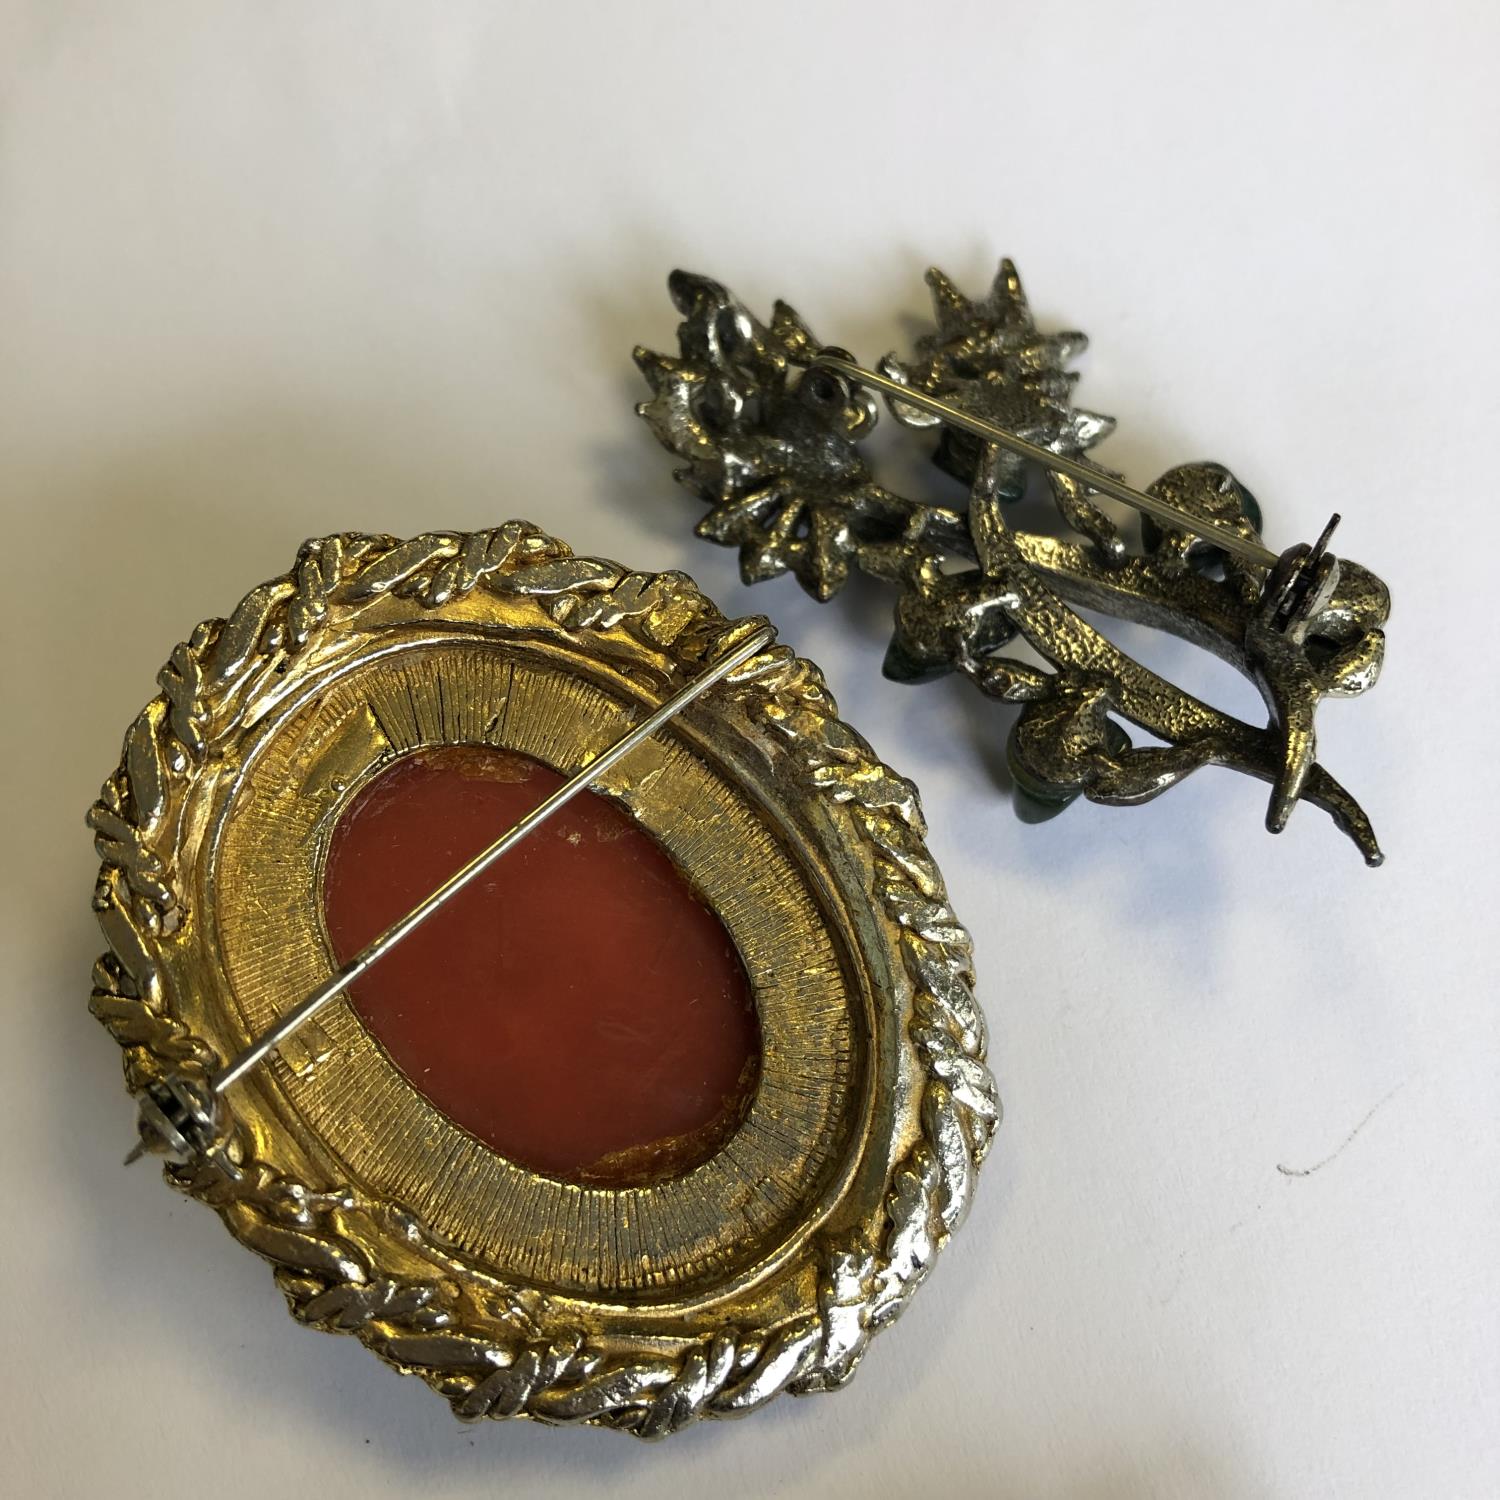 A group of vintage costume jewellery brooches - (6) - No reserve - Image 3 of 8